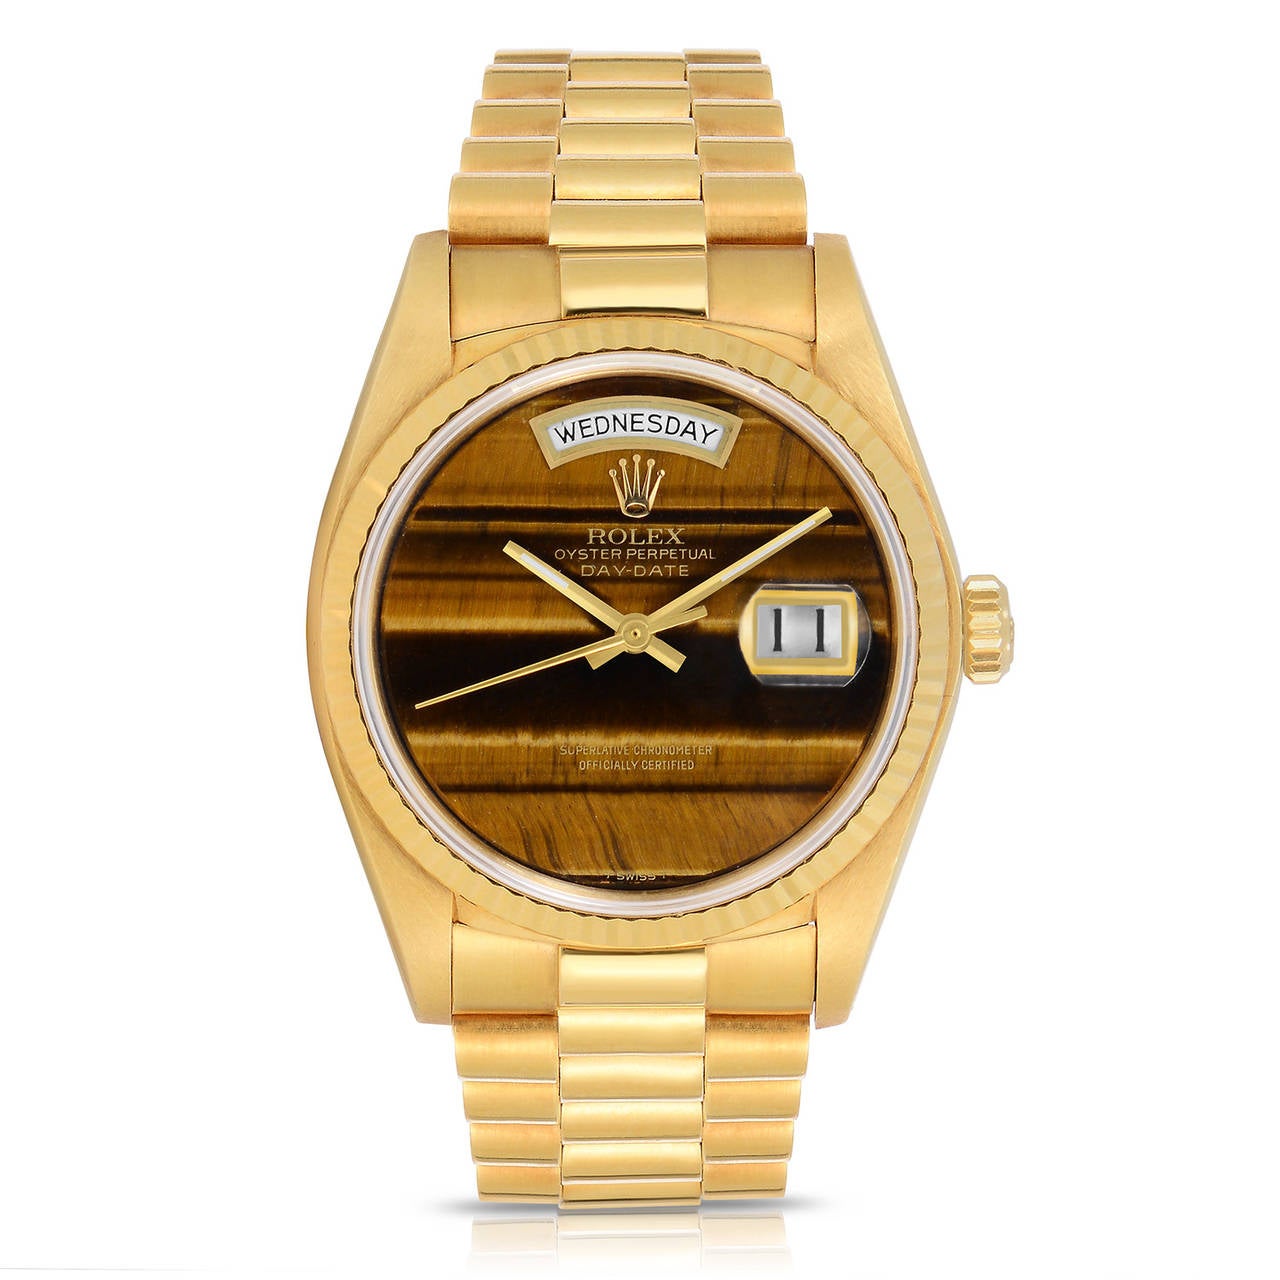 Rolex 18K Yellow Gold Day-Date President
Factory Tiger's Eye Quartz dial with beautiful banding
Solid 18K Yellow Gold Case
Unpolished Case
1980's
All Factory from Rolex
Comes with Original Paperwork and Hang-tag